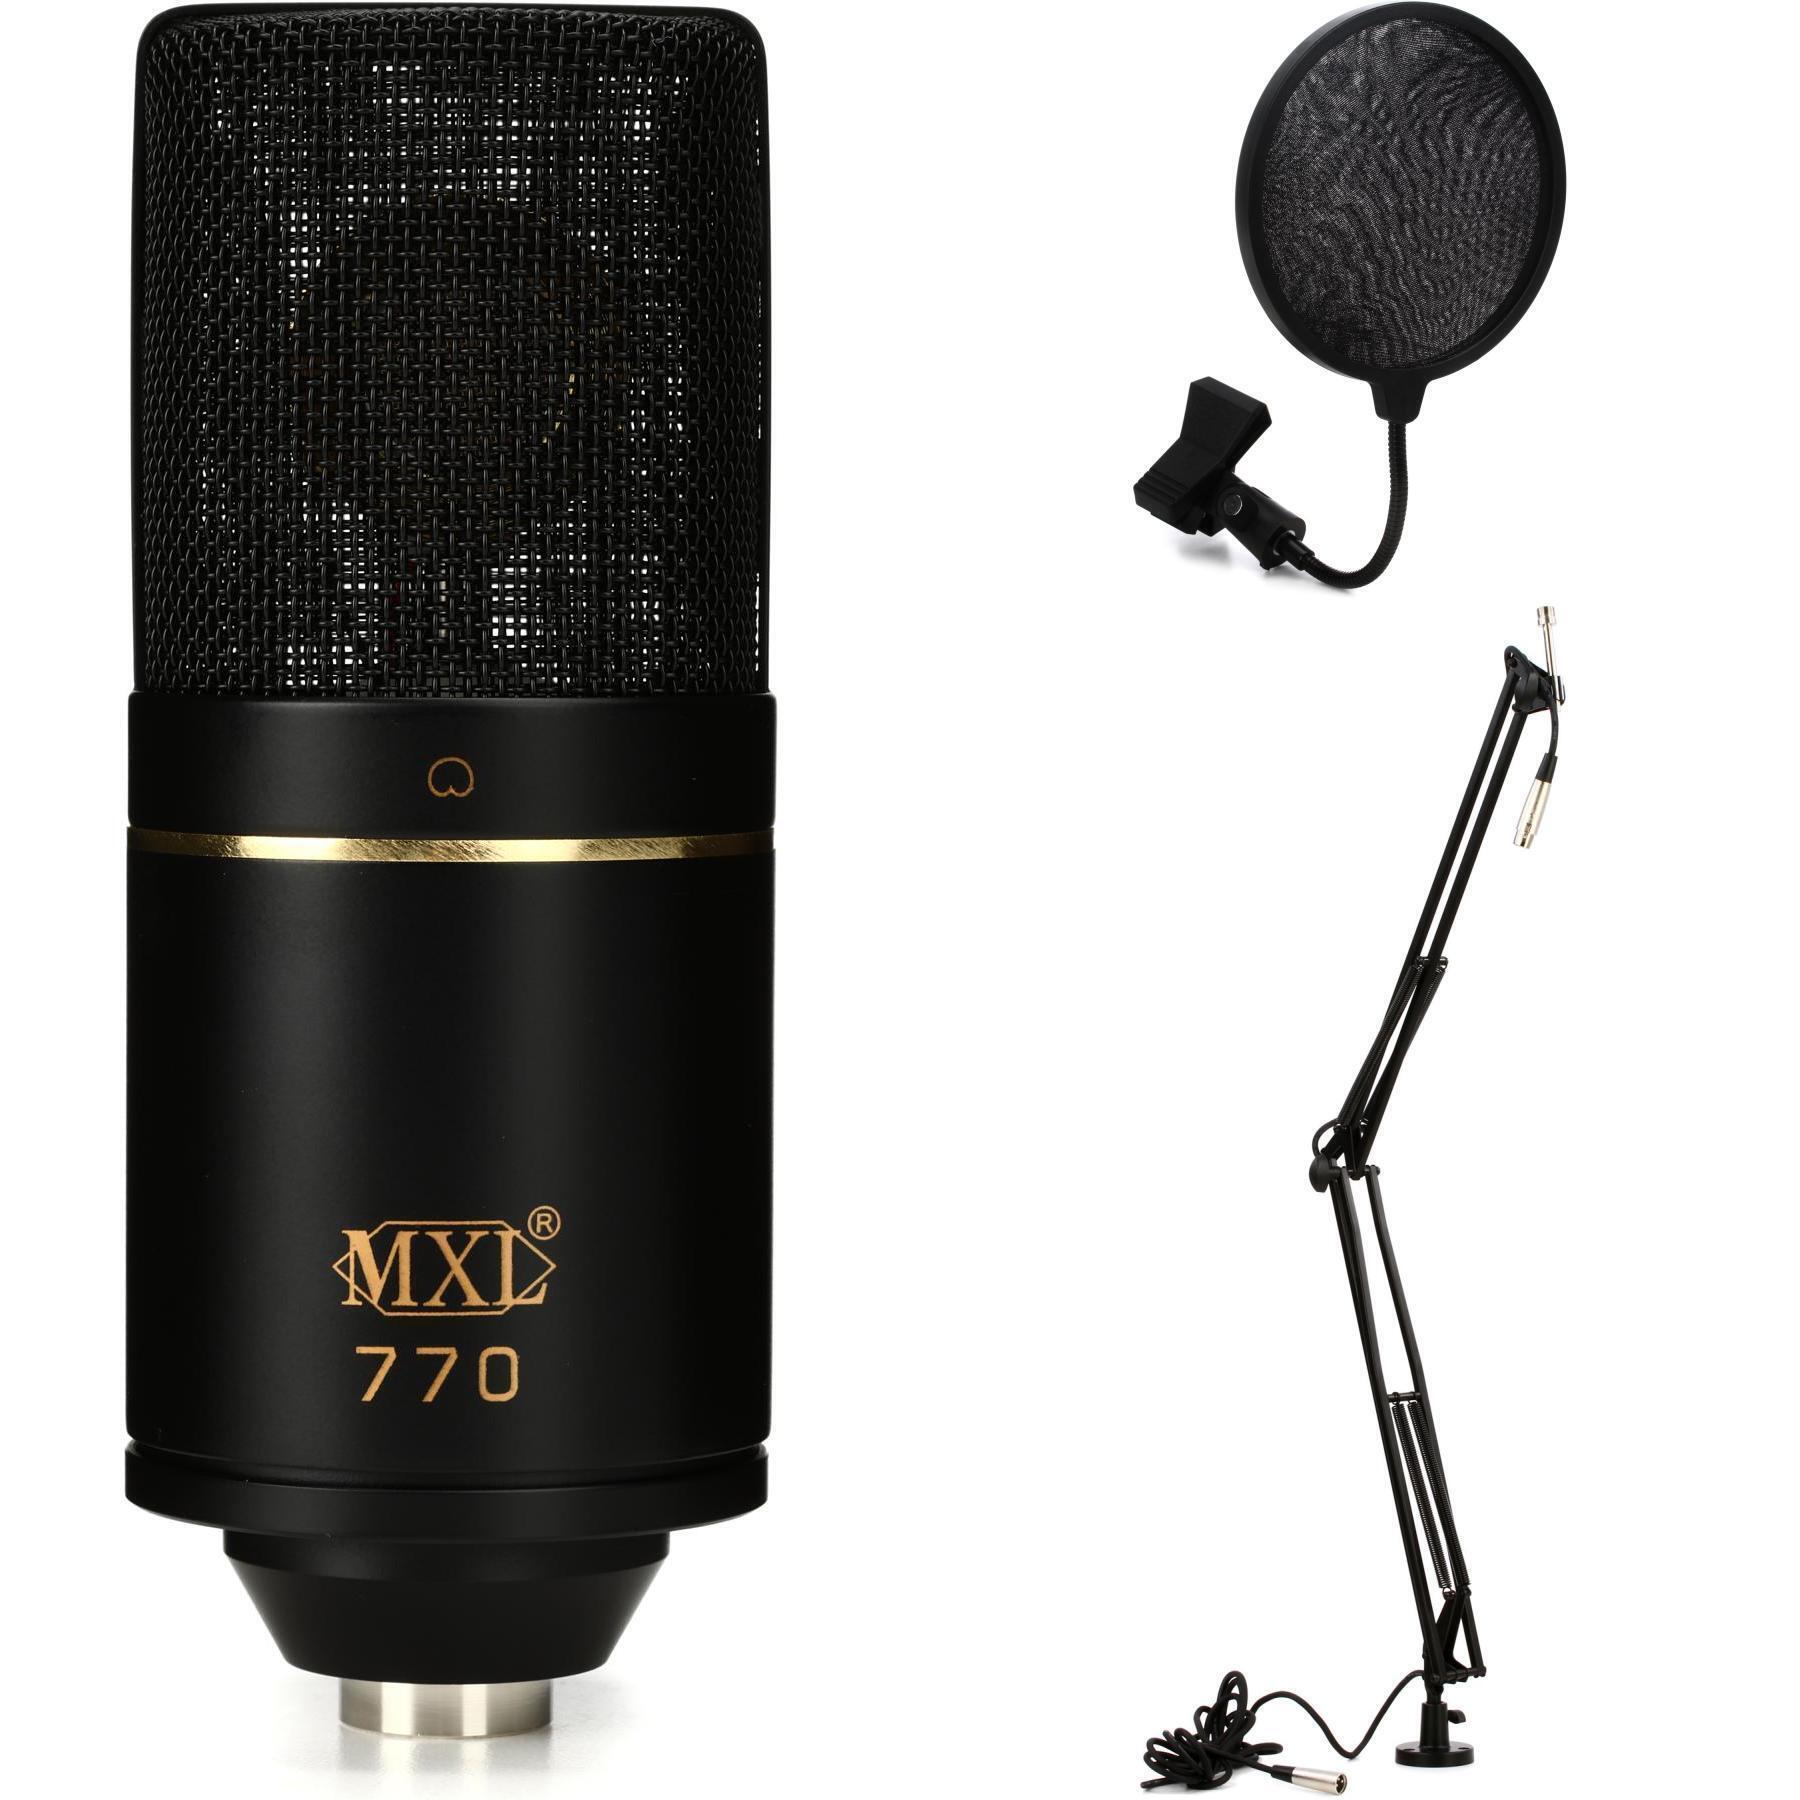 MXL 770 Large-diaphragm Condenser Microphone | Sweetwater